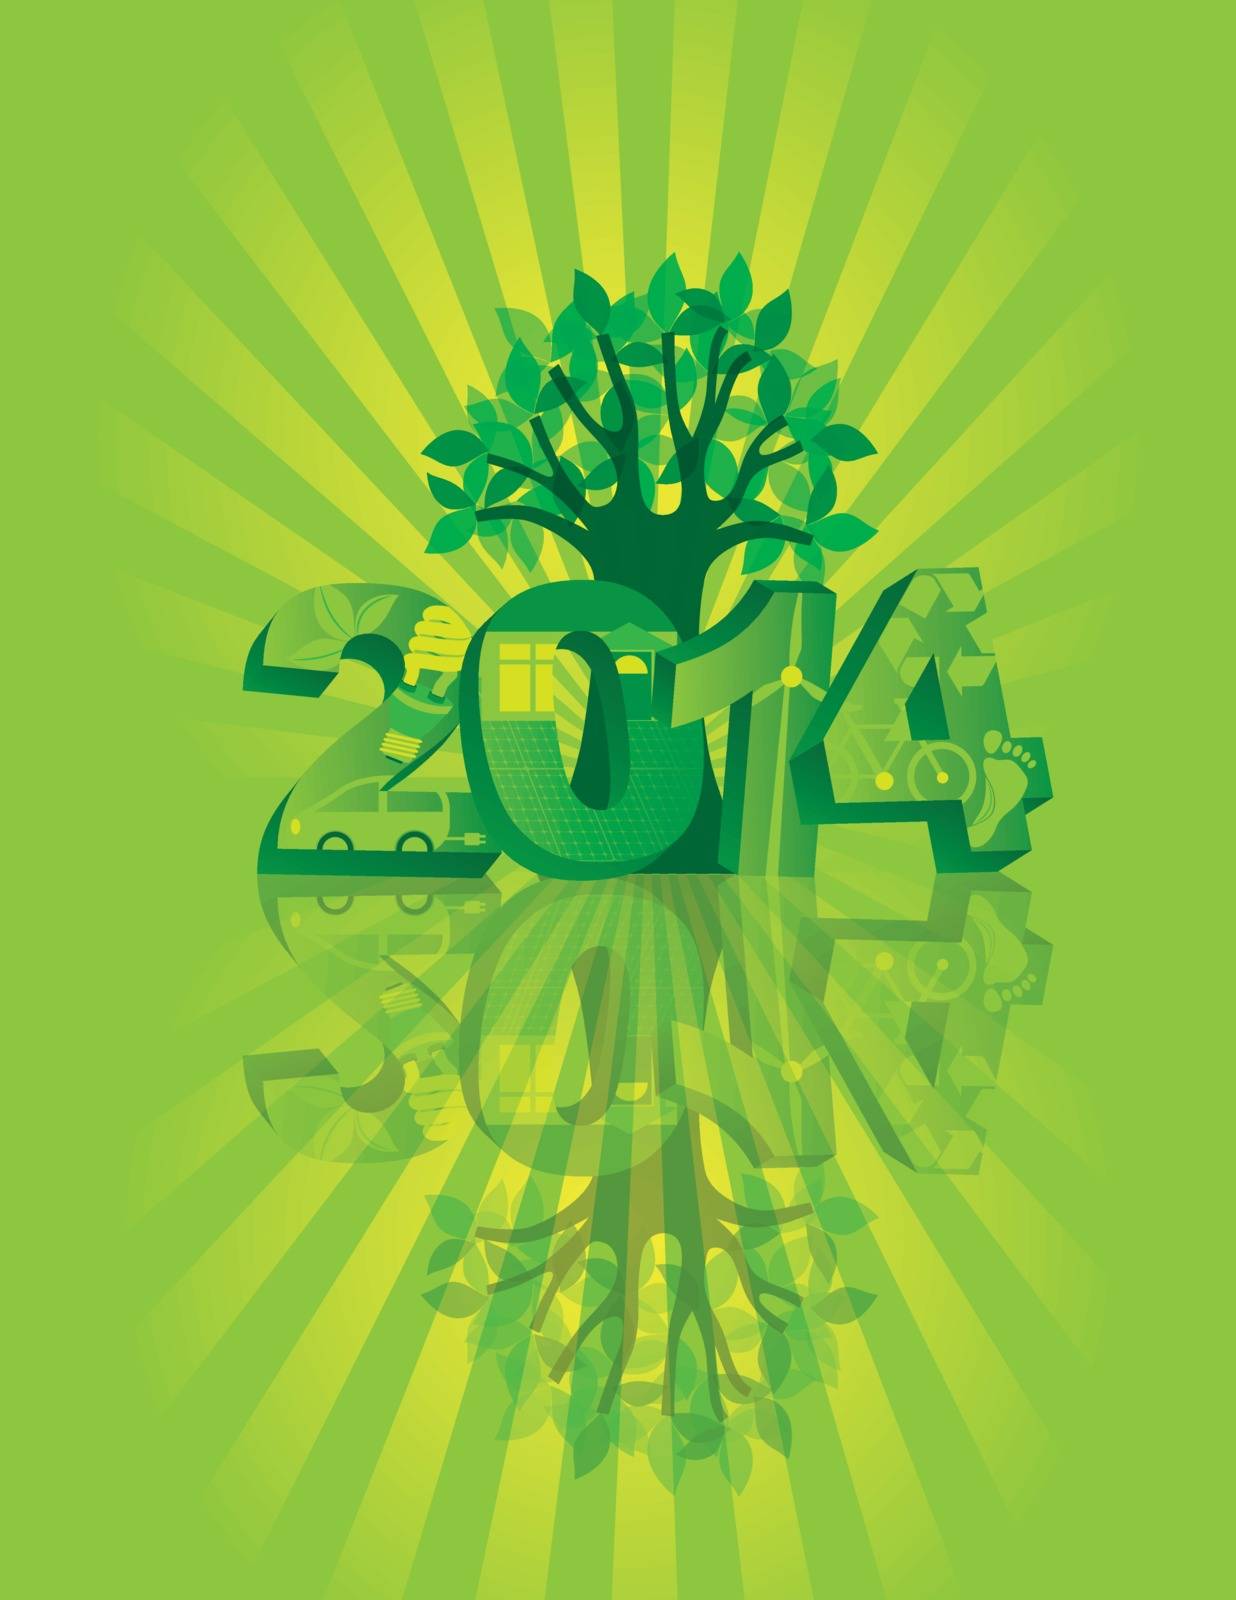 2014 New Year Numerals Go Green Symbols with Tree Isolated on Sunray with Reflection Background Illustration